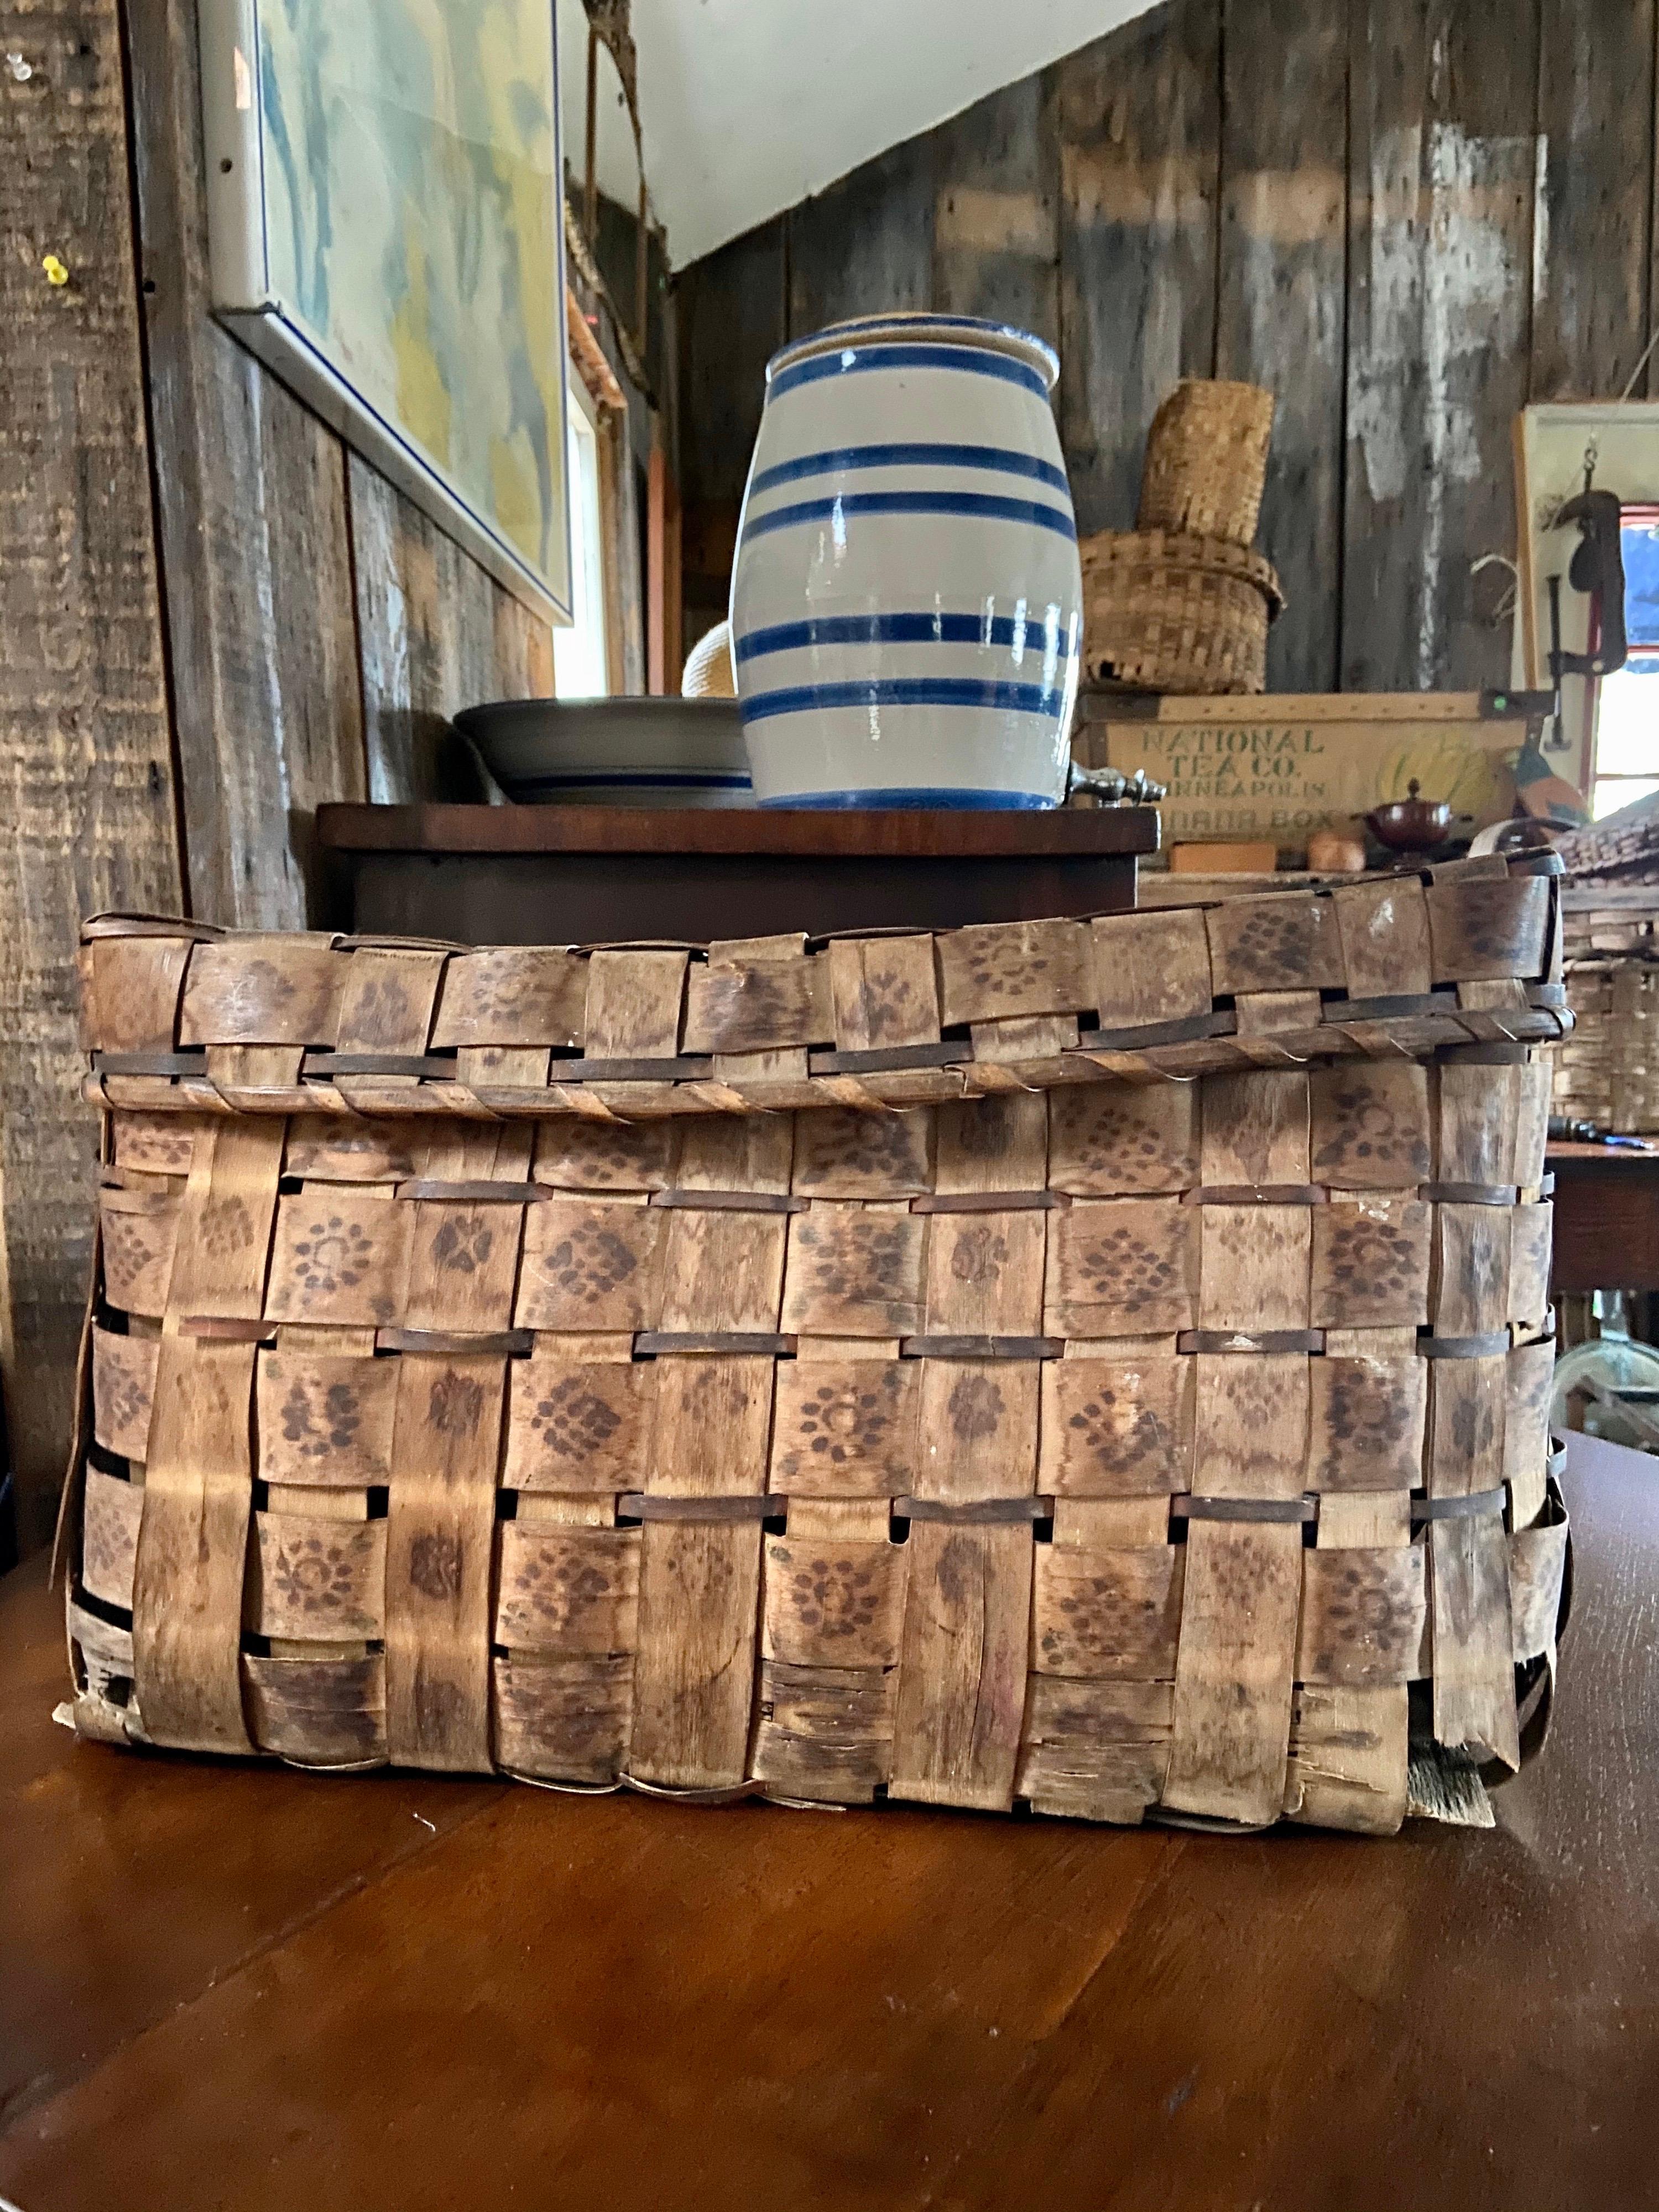 This large lidded Native American Mi’kmaq basket is from northern Maine. Traditional use is for feather storage. Handwoven by indigenous artisan. Subtly decorated with natural dyes. Bottom corners damaged, but structurally sound.

Measures: 19”